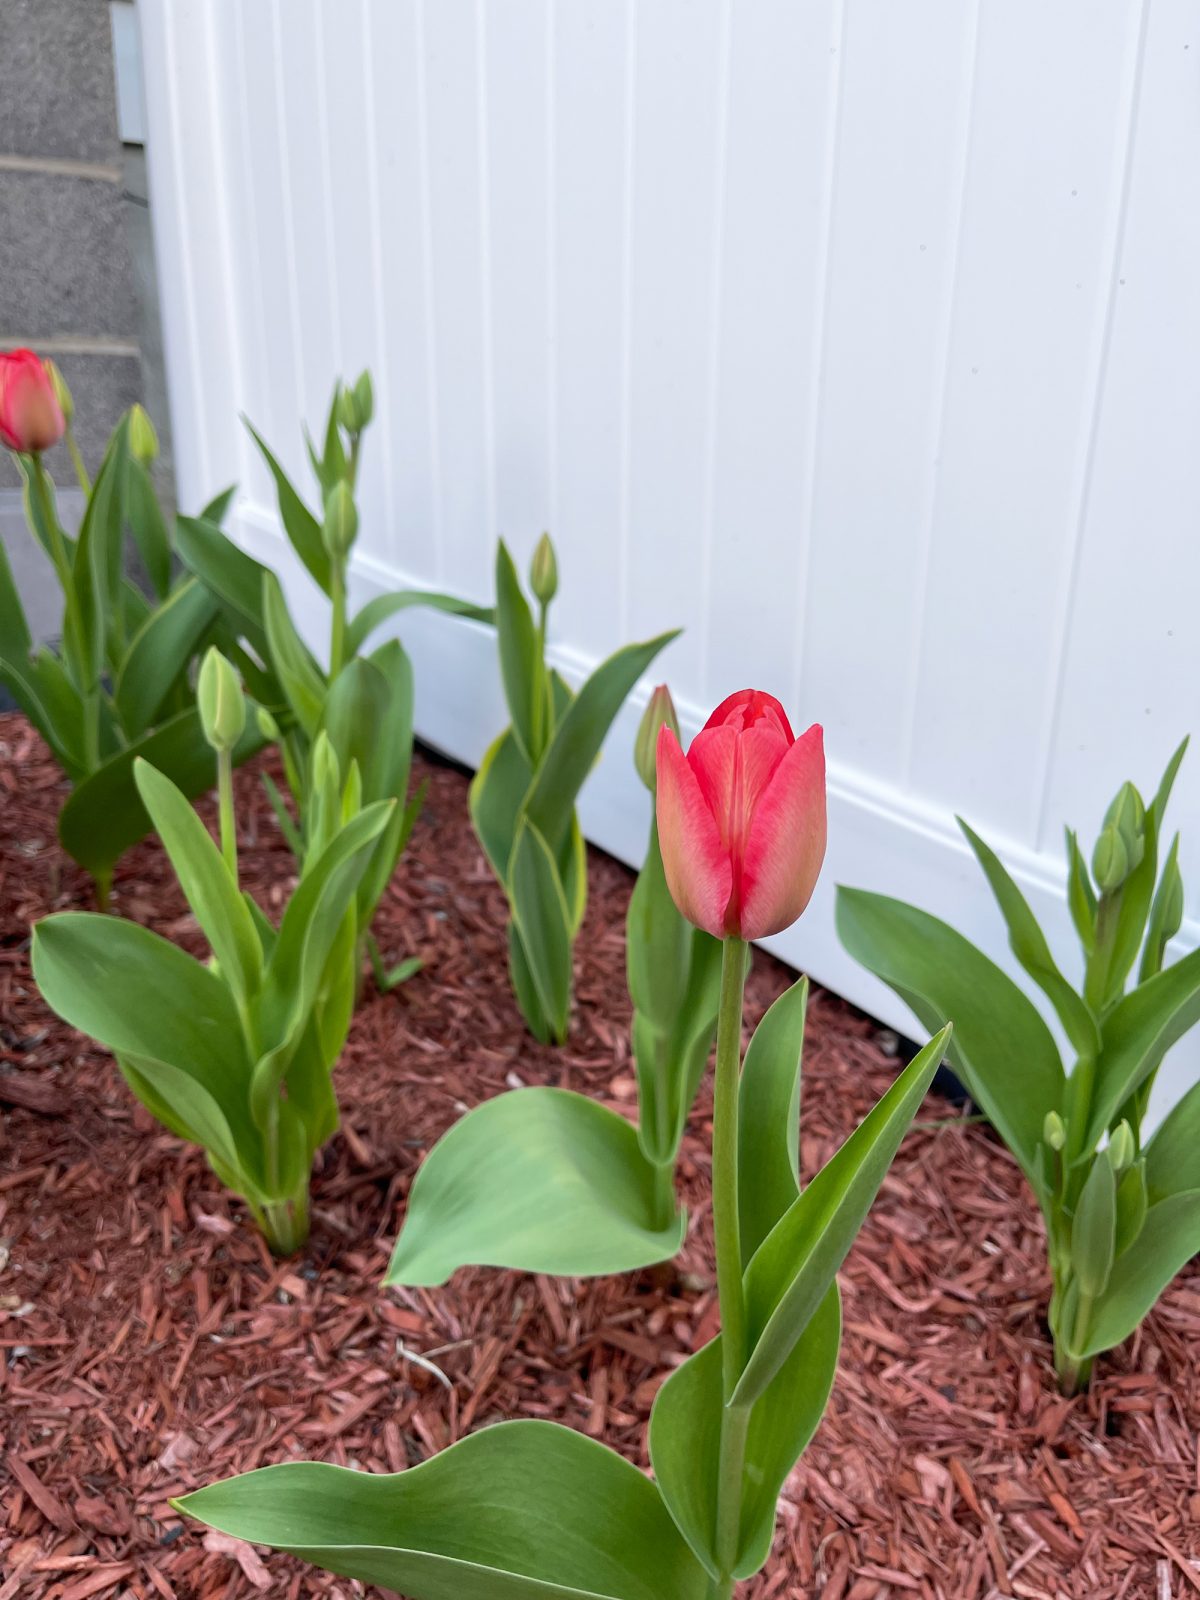 A row of tulips.